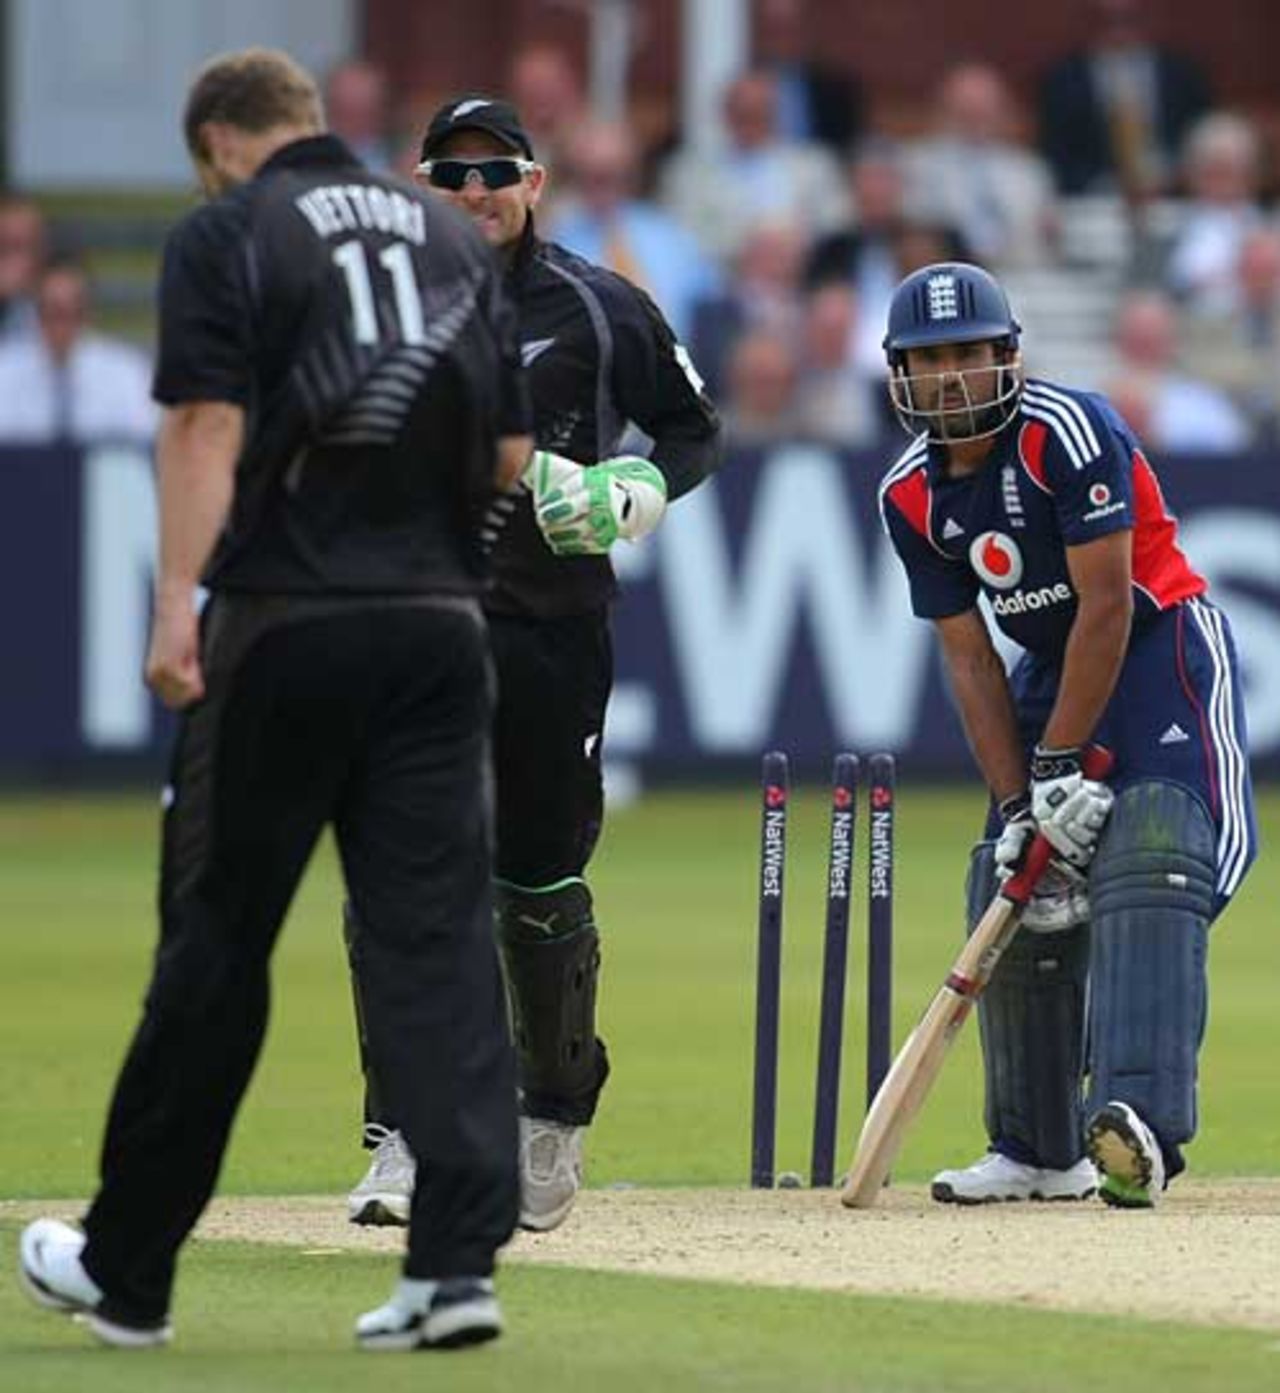 Ravi Bopara looks on after being bowled by Daniel Vettori, England v New Zealand, 5th ODI, Lord's, June 28, 2008